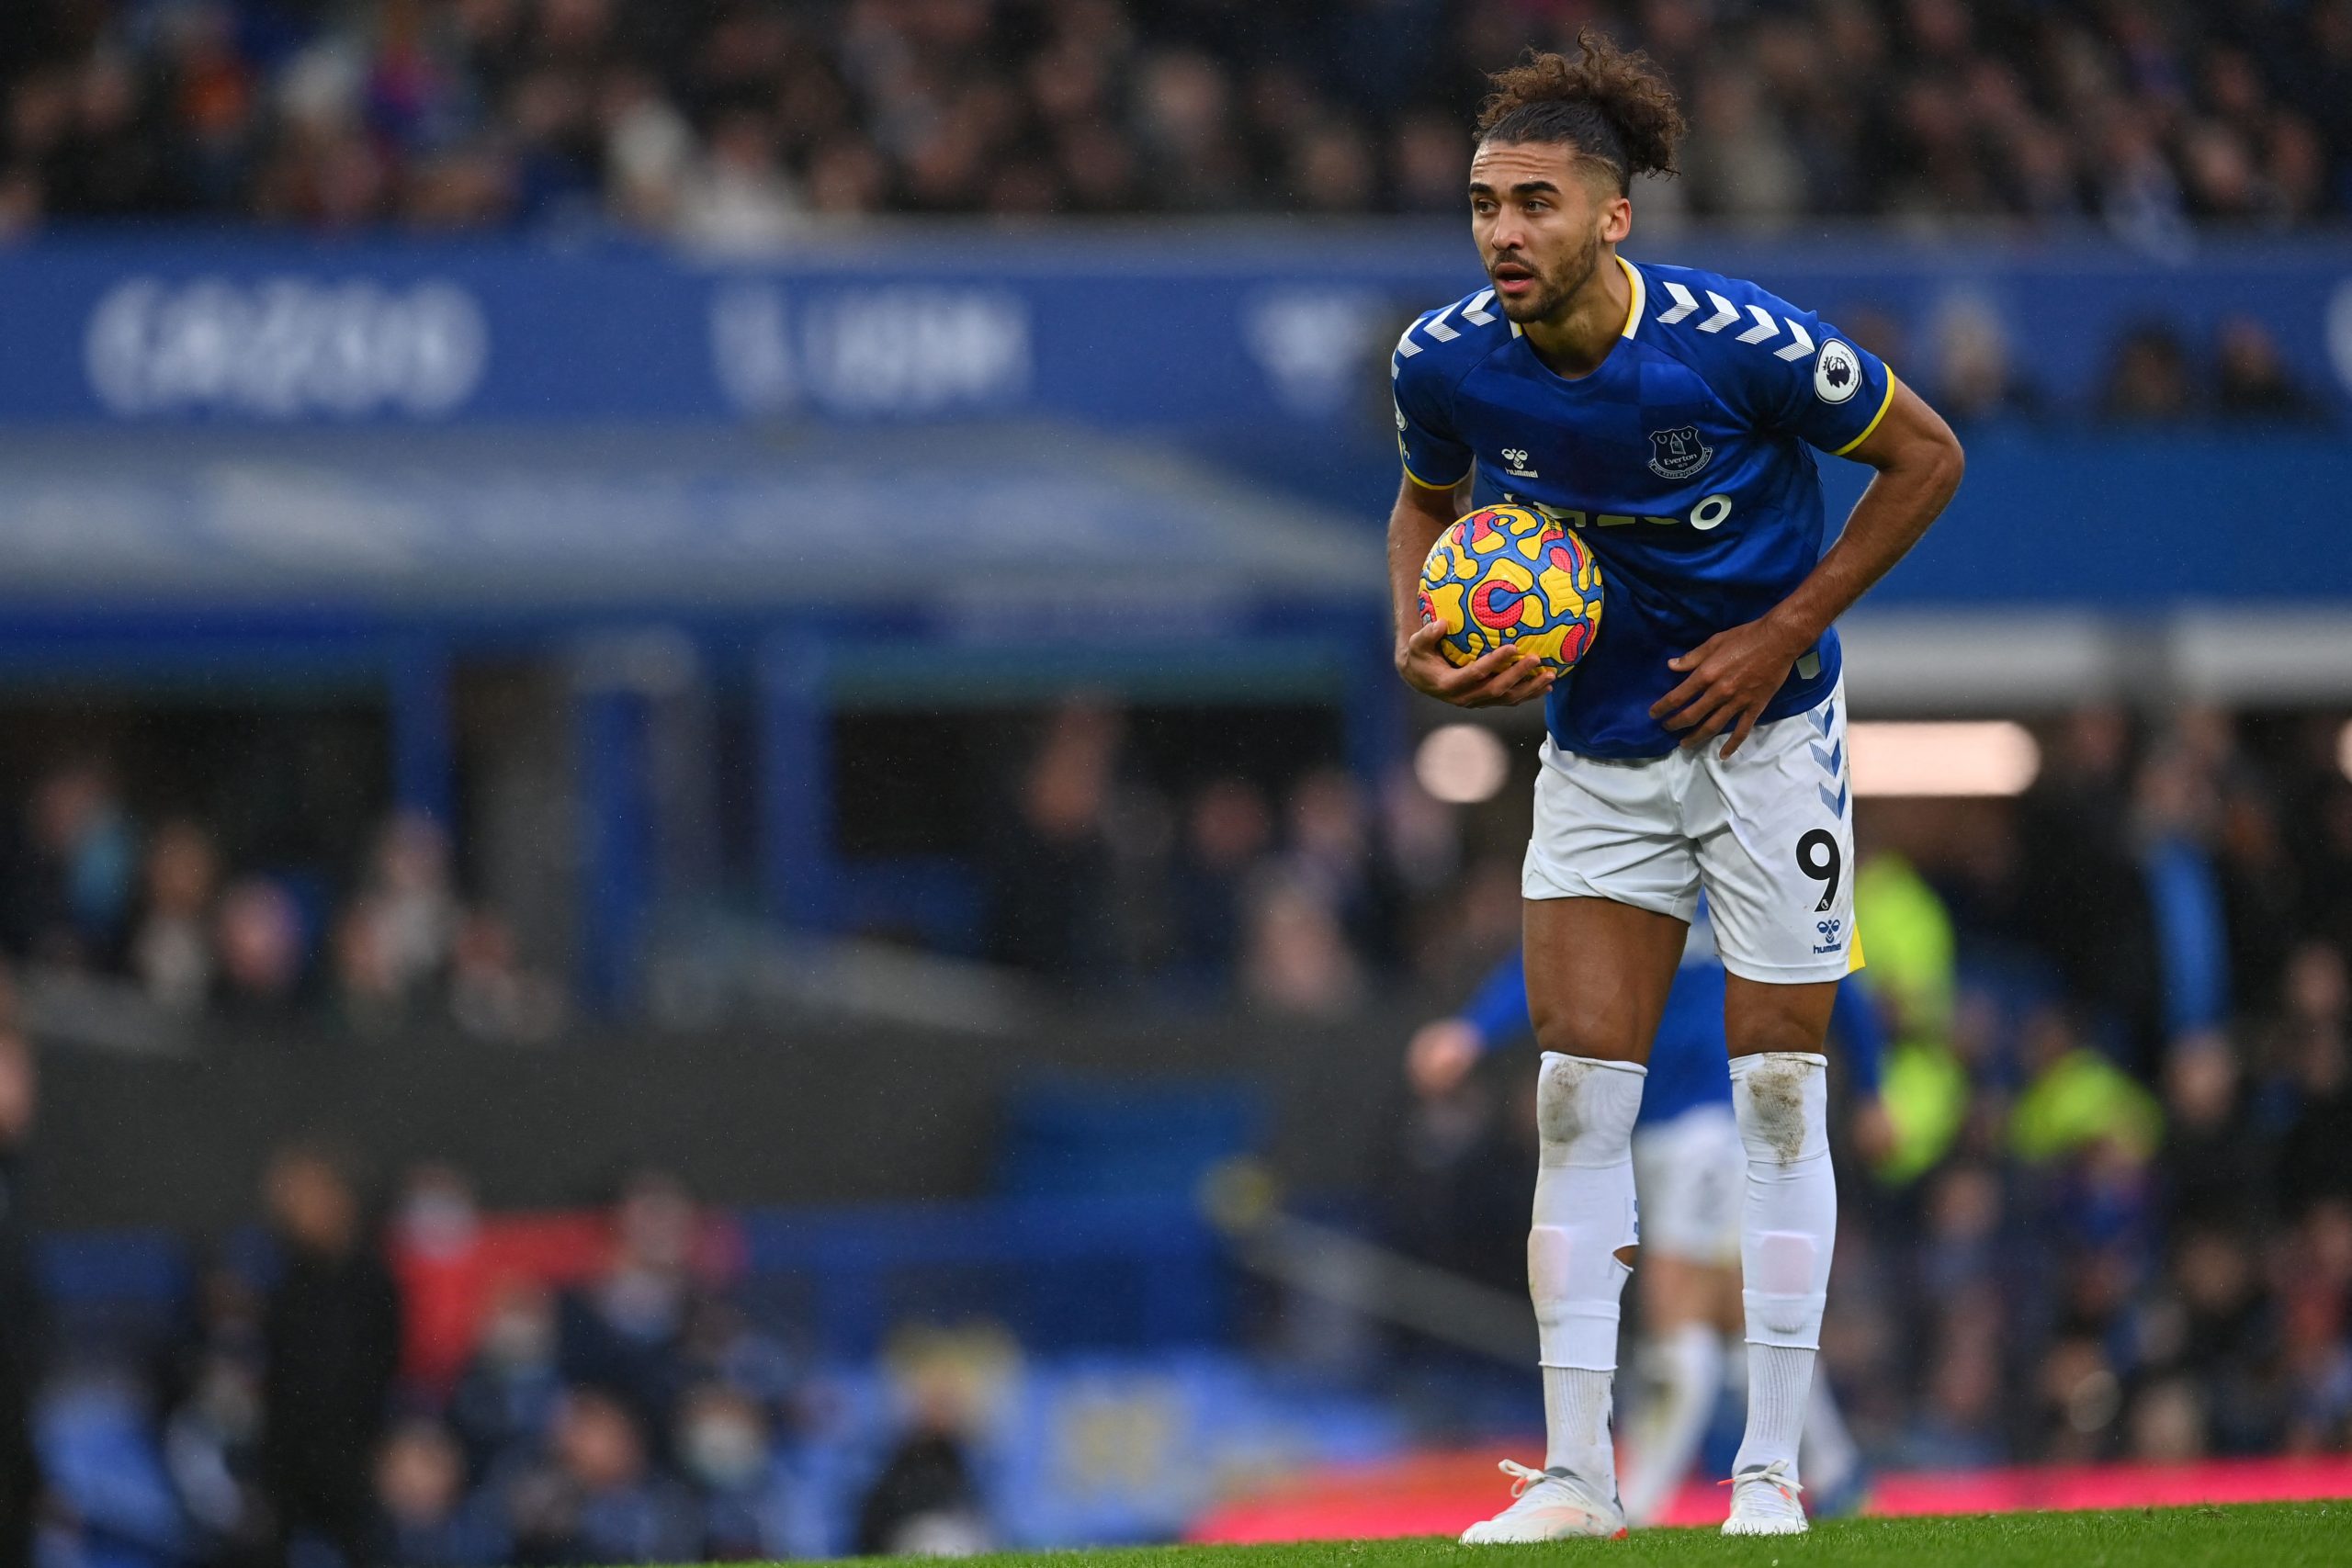 Everton's English striker Dominic Calvert-Lewin prepares to take a penalty kick during the English Premier League football match between Everton and Brighton and Hove Albion at Goodison Park in Liverpool, north west England on January 2, 2022. - RESTRICTED TO EDITORIAL USE. No use with unauthorized audio, video, data, fixture lists, club/league logos or 'live' services. Online in-match use limited to 120 images. An additional 40 images may be used in extra time. No video emulation. Social media in-match use limited to 120 images. An additional 40 images may be used in extra time. No use in betting publications, games or single club/league/player publications. (Photo by Paul ELLIS / AFP) / RESTRICTED TO EDITORIAL USE. No use with unauthorized audio, video, data, fixture lists, club/league logos or 'live' services. Online in-match use limited to 120 images. An additional 40 images may be used in extra time. No video emulation. Social media in-match use limited to 120 images. An additional 40 images may be used in extra time. No use in betting publications, games or single club/league/player publications. / RESTRICTED TO EDITORIAL USE. No use with unauthorized audio, video, data, fixture lists, club/league logos or 'live' services. Online in-match use limited to 120 images. An additional 40 images may be used in extra time. No video emulation. Social media in-match use limited to 120 images. An additional 40 images may be used in extra time. No use in betting publications, games or single club/league/player publications. (Photo by PAUL ELLIS/AFP via Getty Images)The 4th Official uses images provided by the following image agency: Getty Images (https://www.gettyimages.de/) Imago Images (https://www.imago-images.de/)